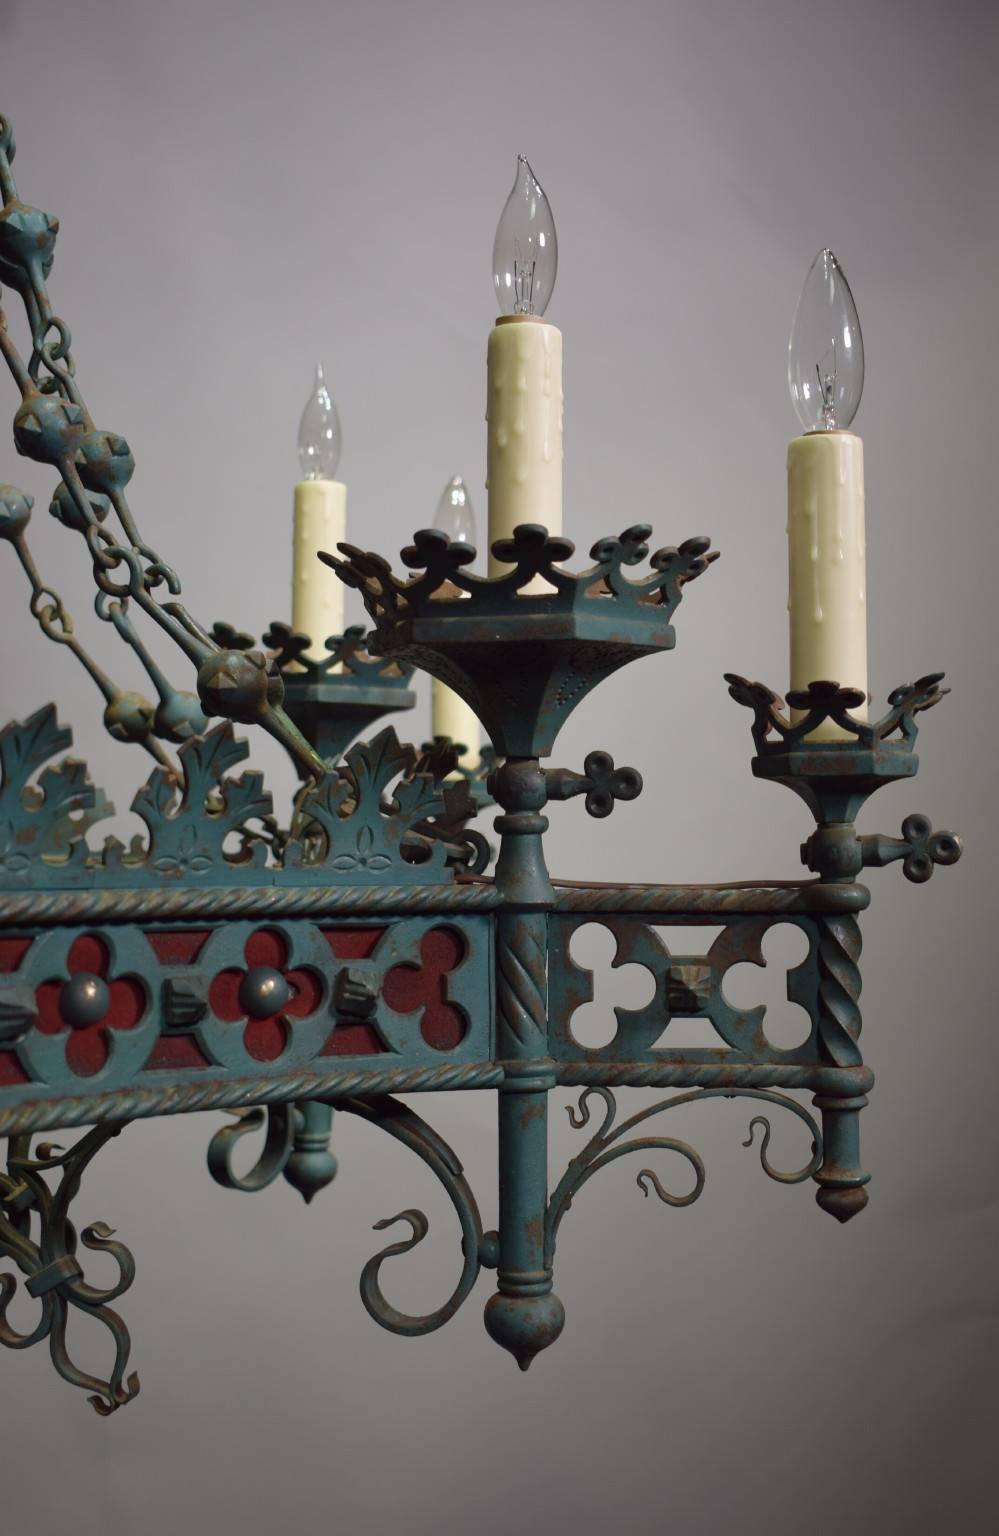 Very fine 19th century French Gothic style chandelier of painted iron with the original finish. Was originally for candles, now electrified. Twelve lights in two tiers.